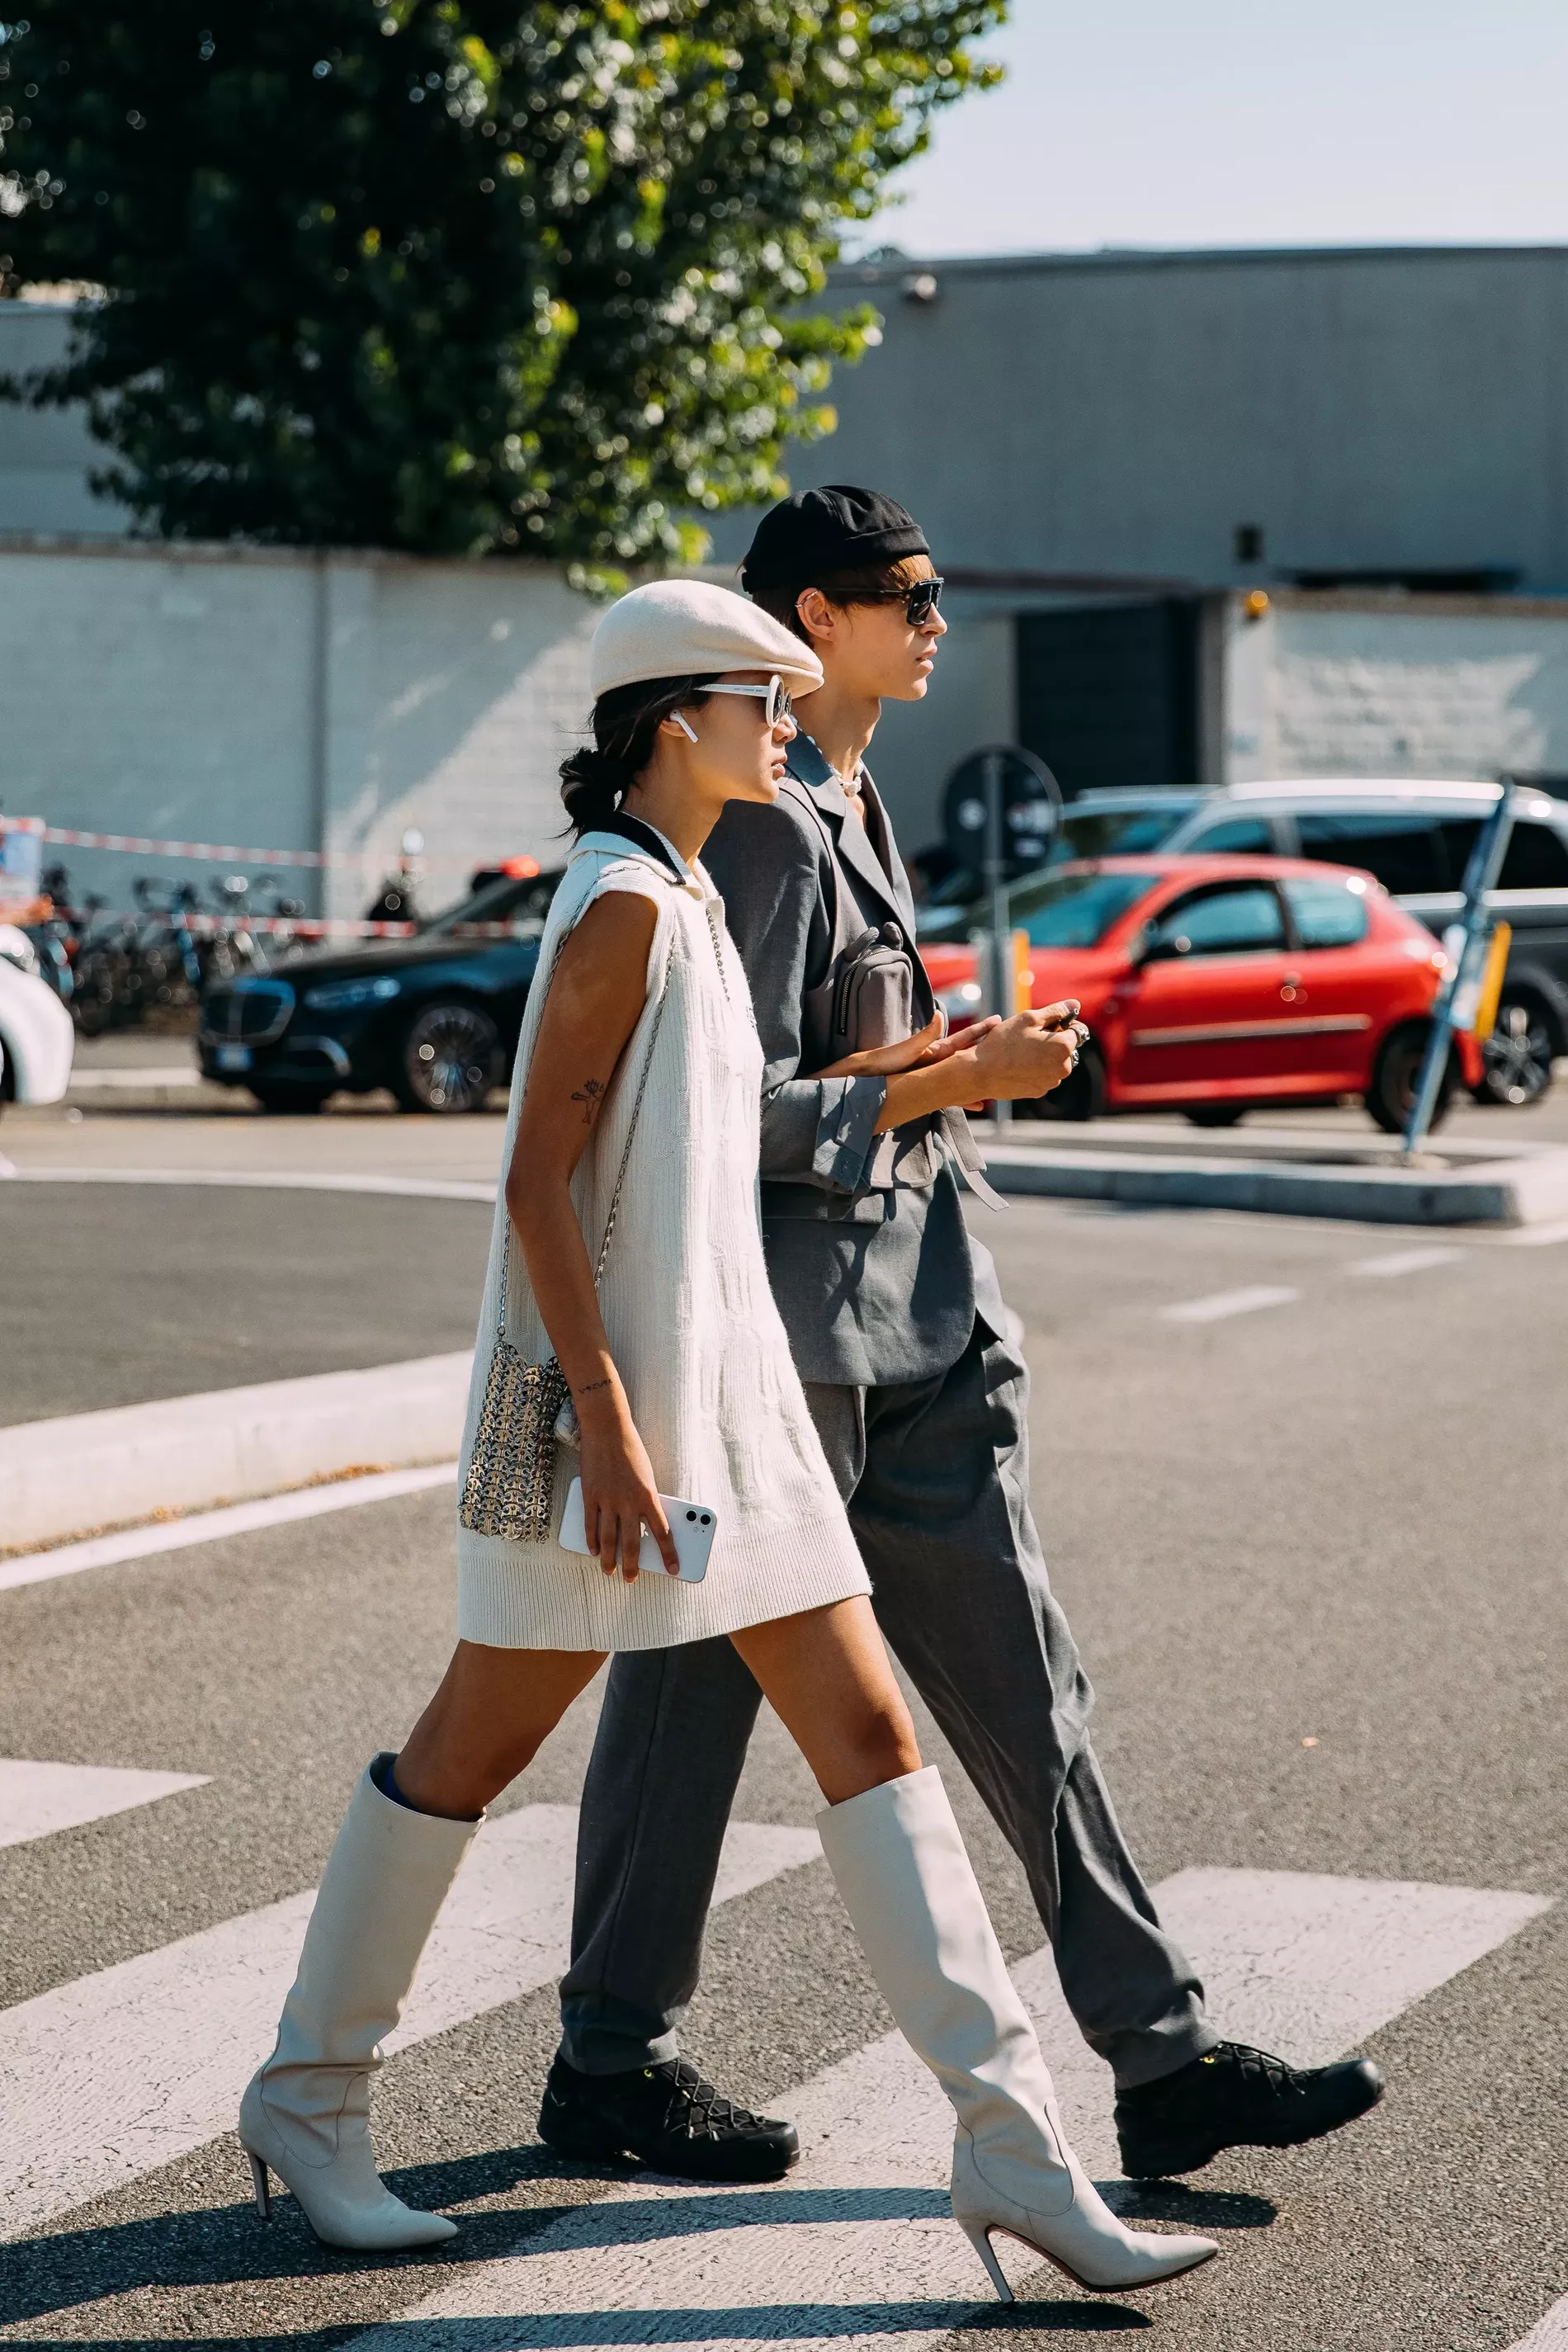 Knee-high boots are going nowhere according to street stylers